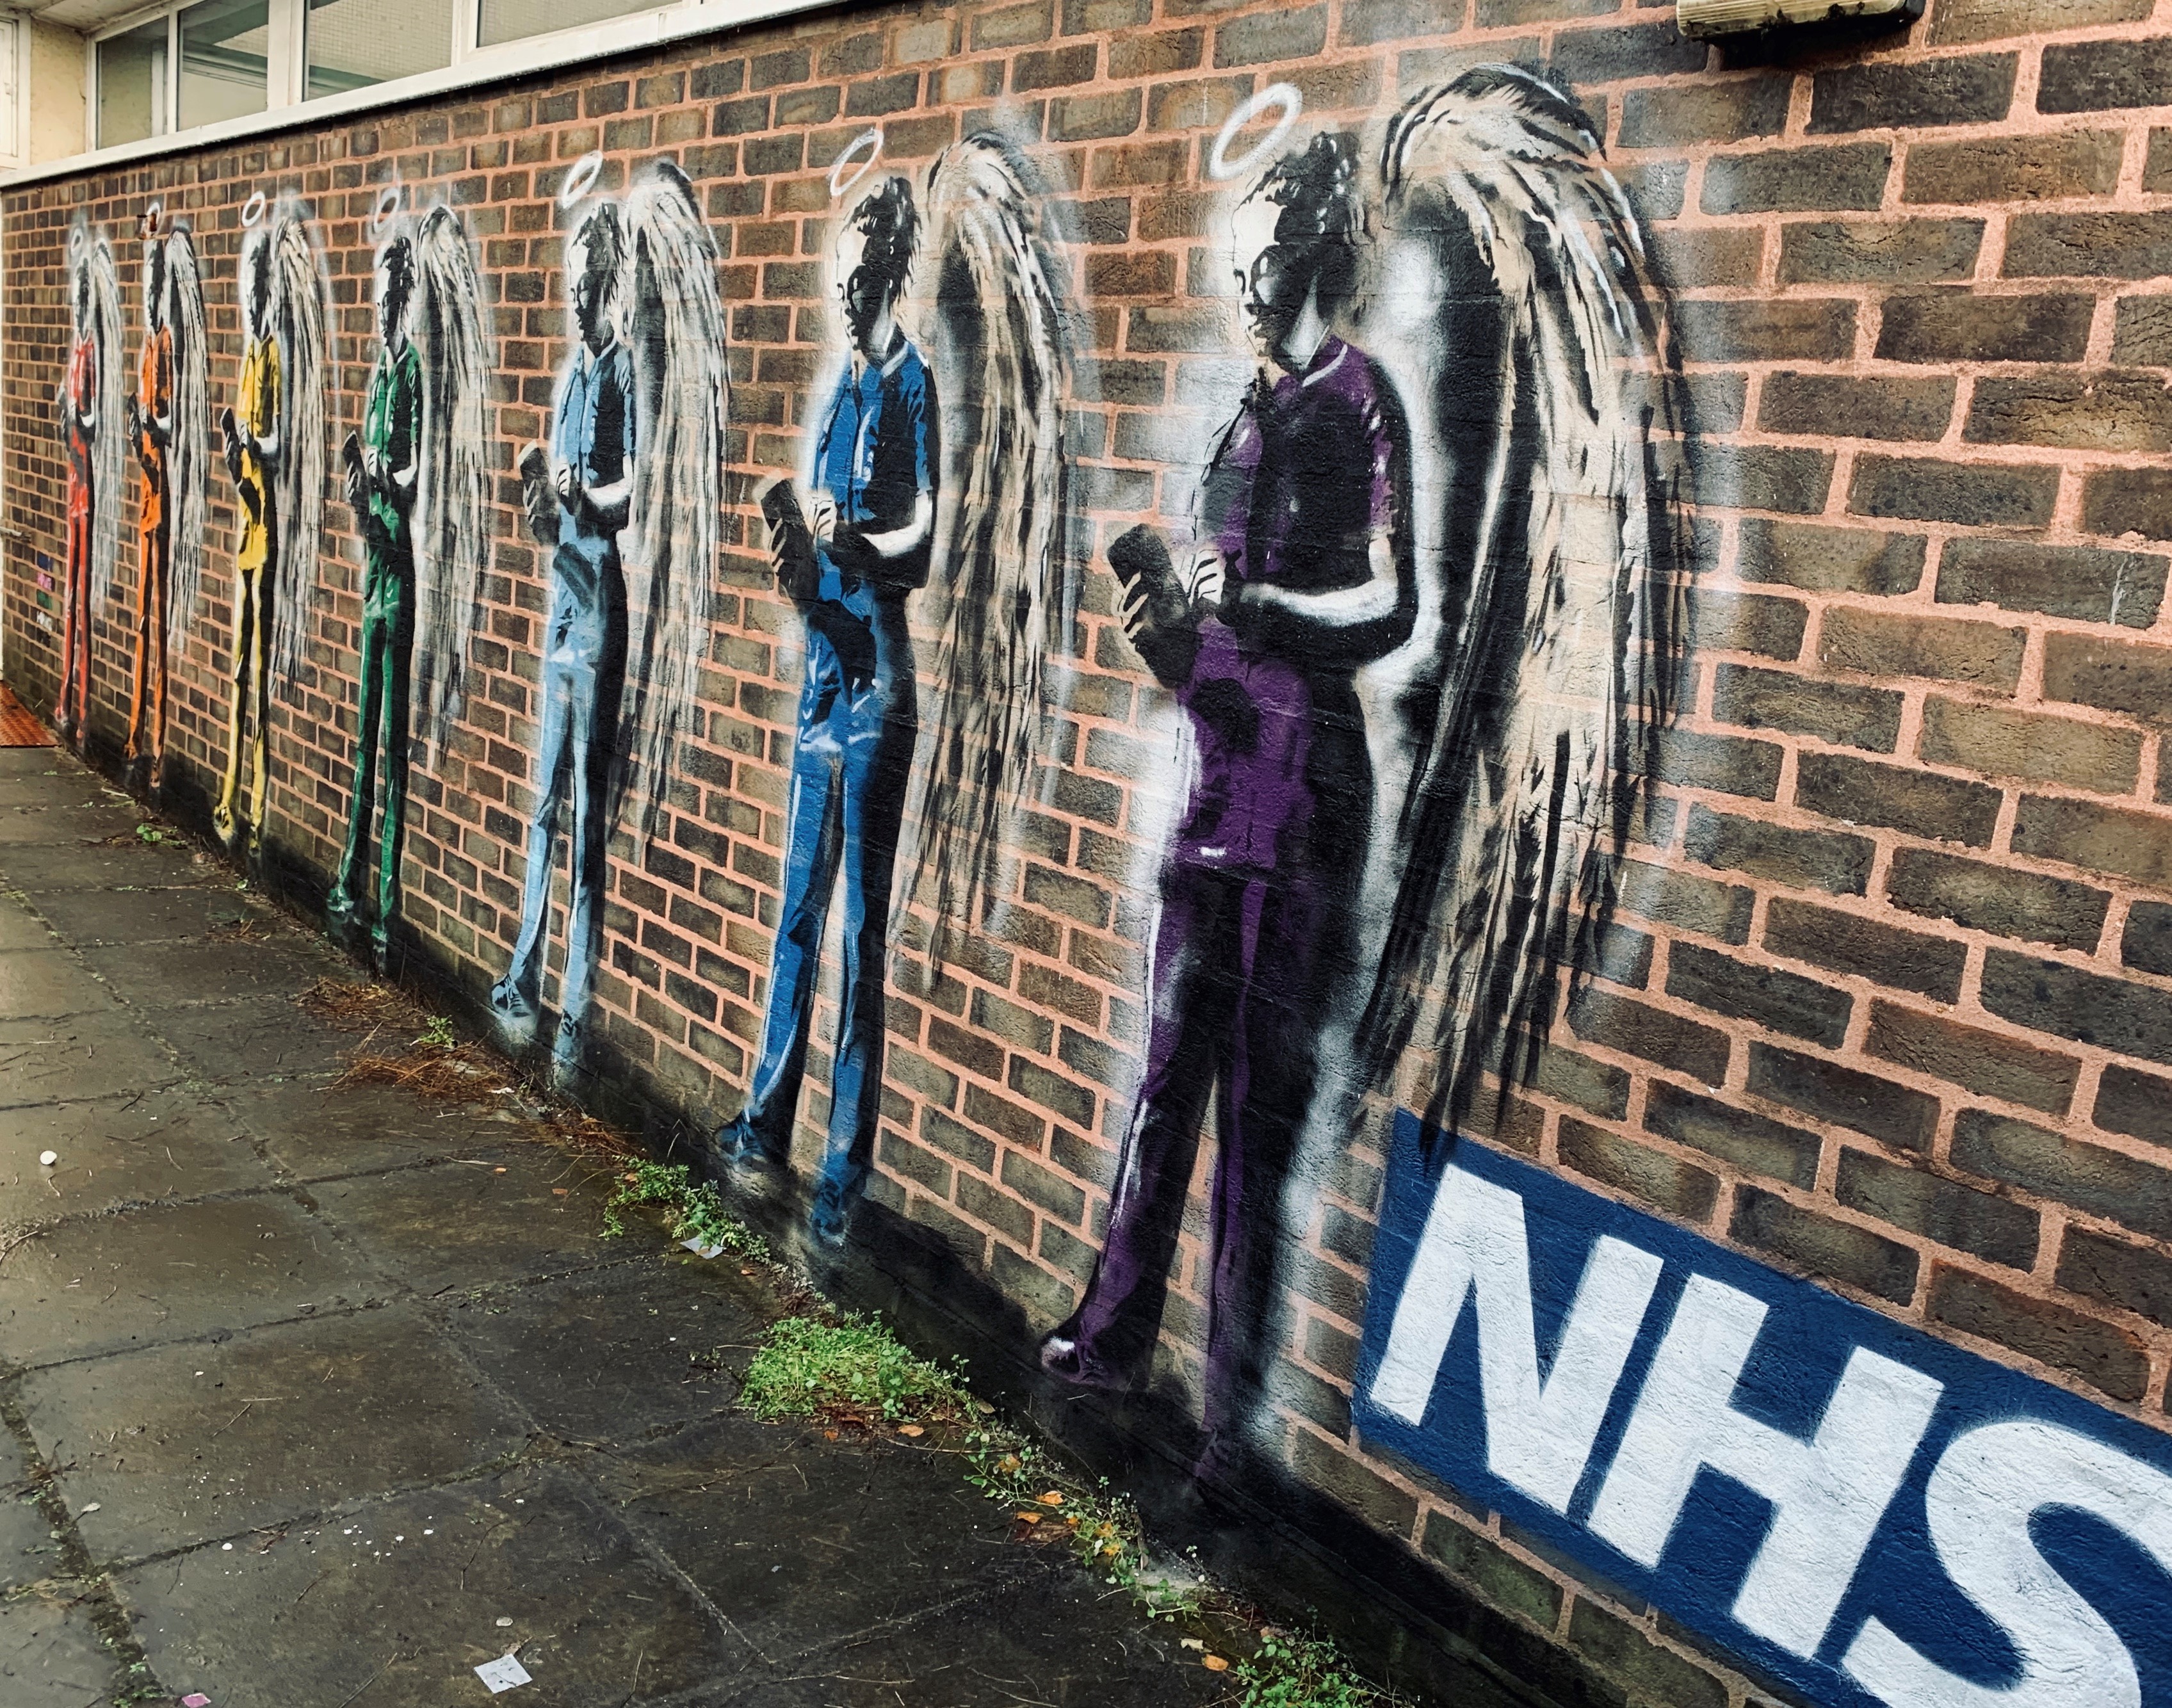 A mural by Worthing-based graffiti artist Horace at St Richard's Hospital in Chichester